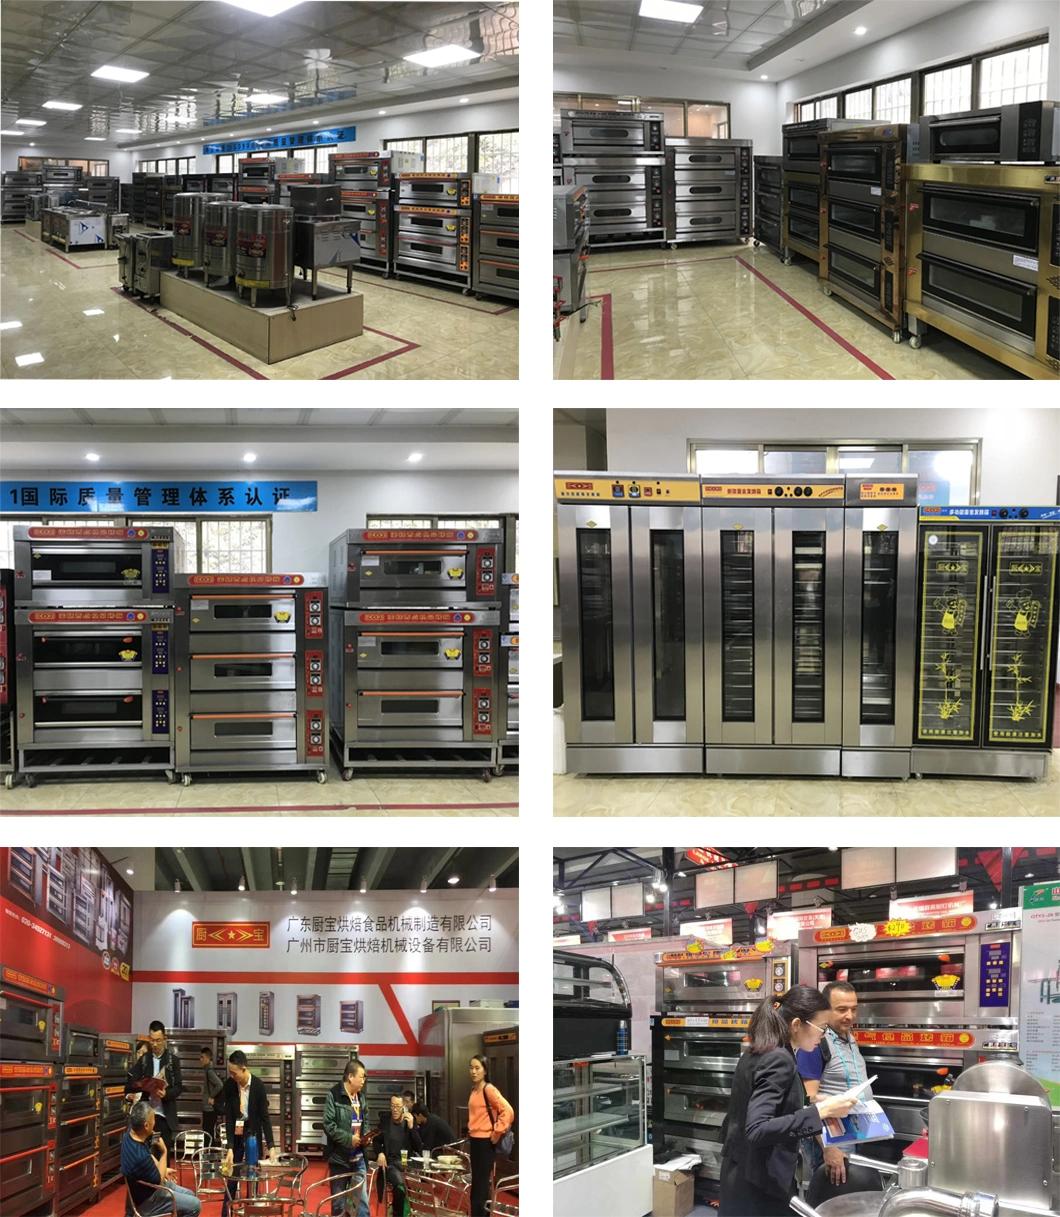 4 Deck 16 Tray Electric Pizza Oven for Commercial Kitchen Baking Equipment Bakery Machine Food Machinery